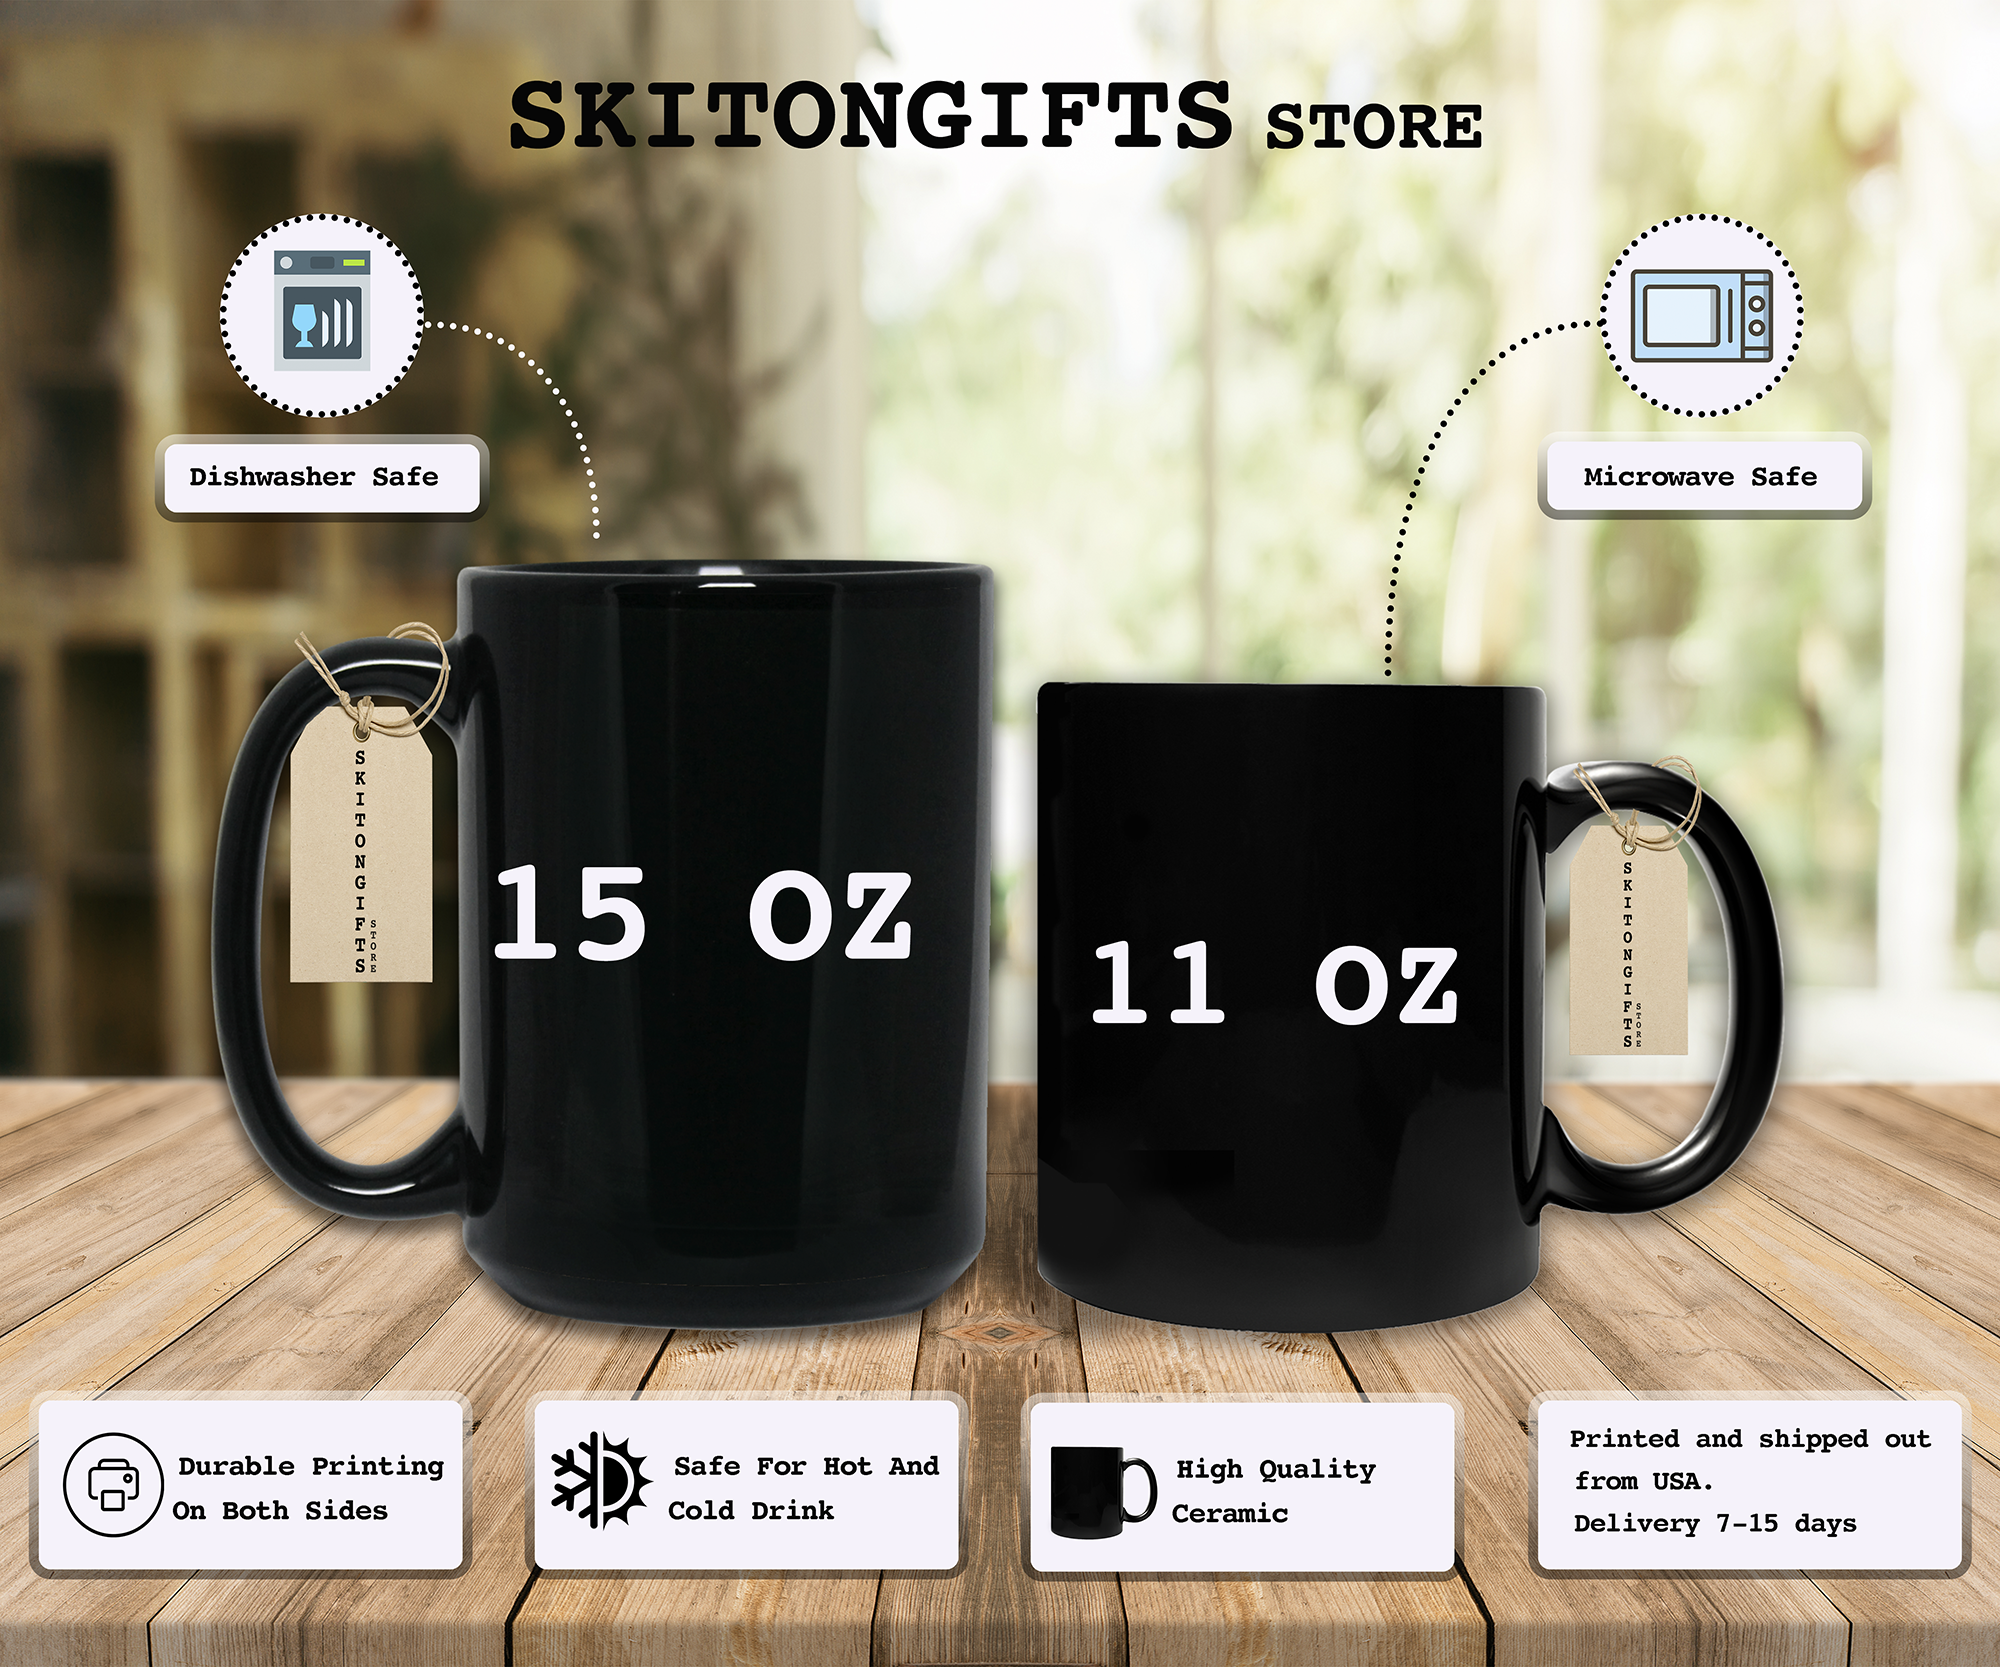 Skitongifts Coffee Mug Funny Ceramic Novelty M23-Kl231221-It You're Happy And You Know It Clap Your Oh Yvc66Or